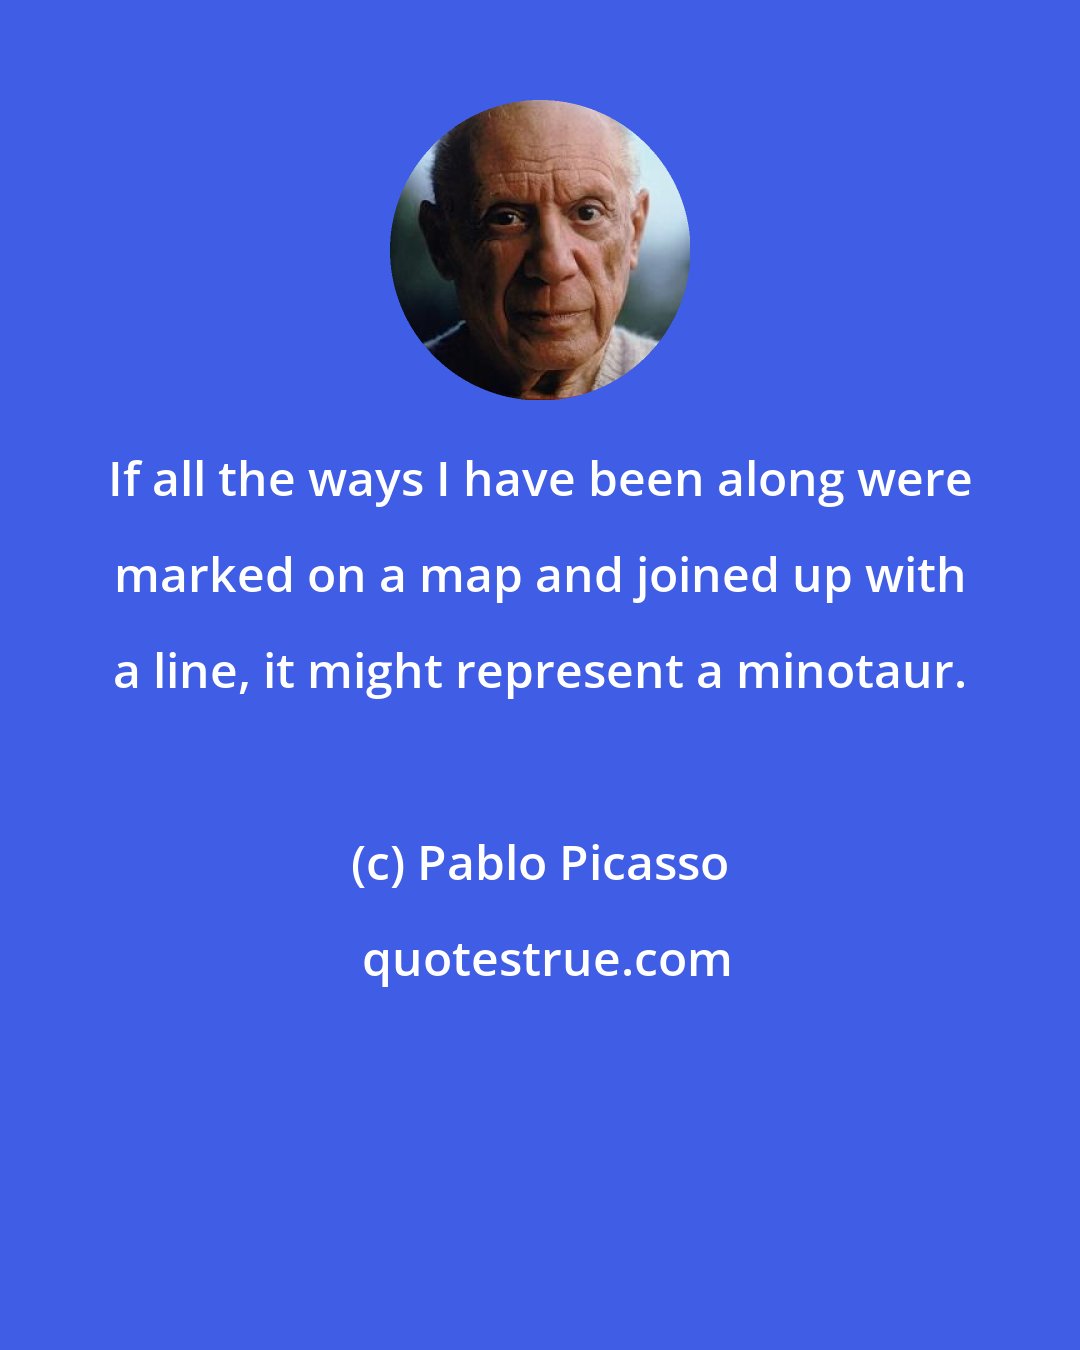 Pablo Picasso: If all the ways I have been along were marked on a map and joined up with a line, it might represent a minotaur.